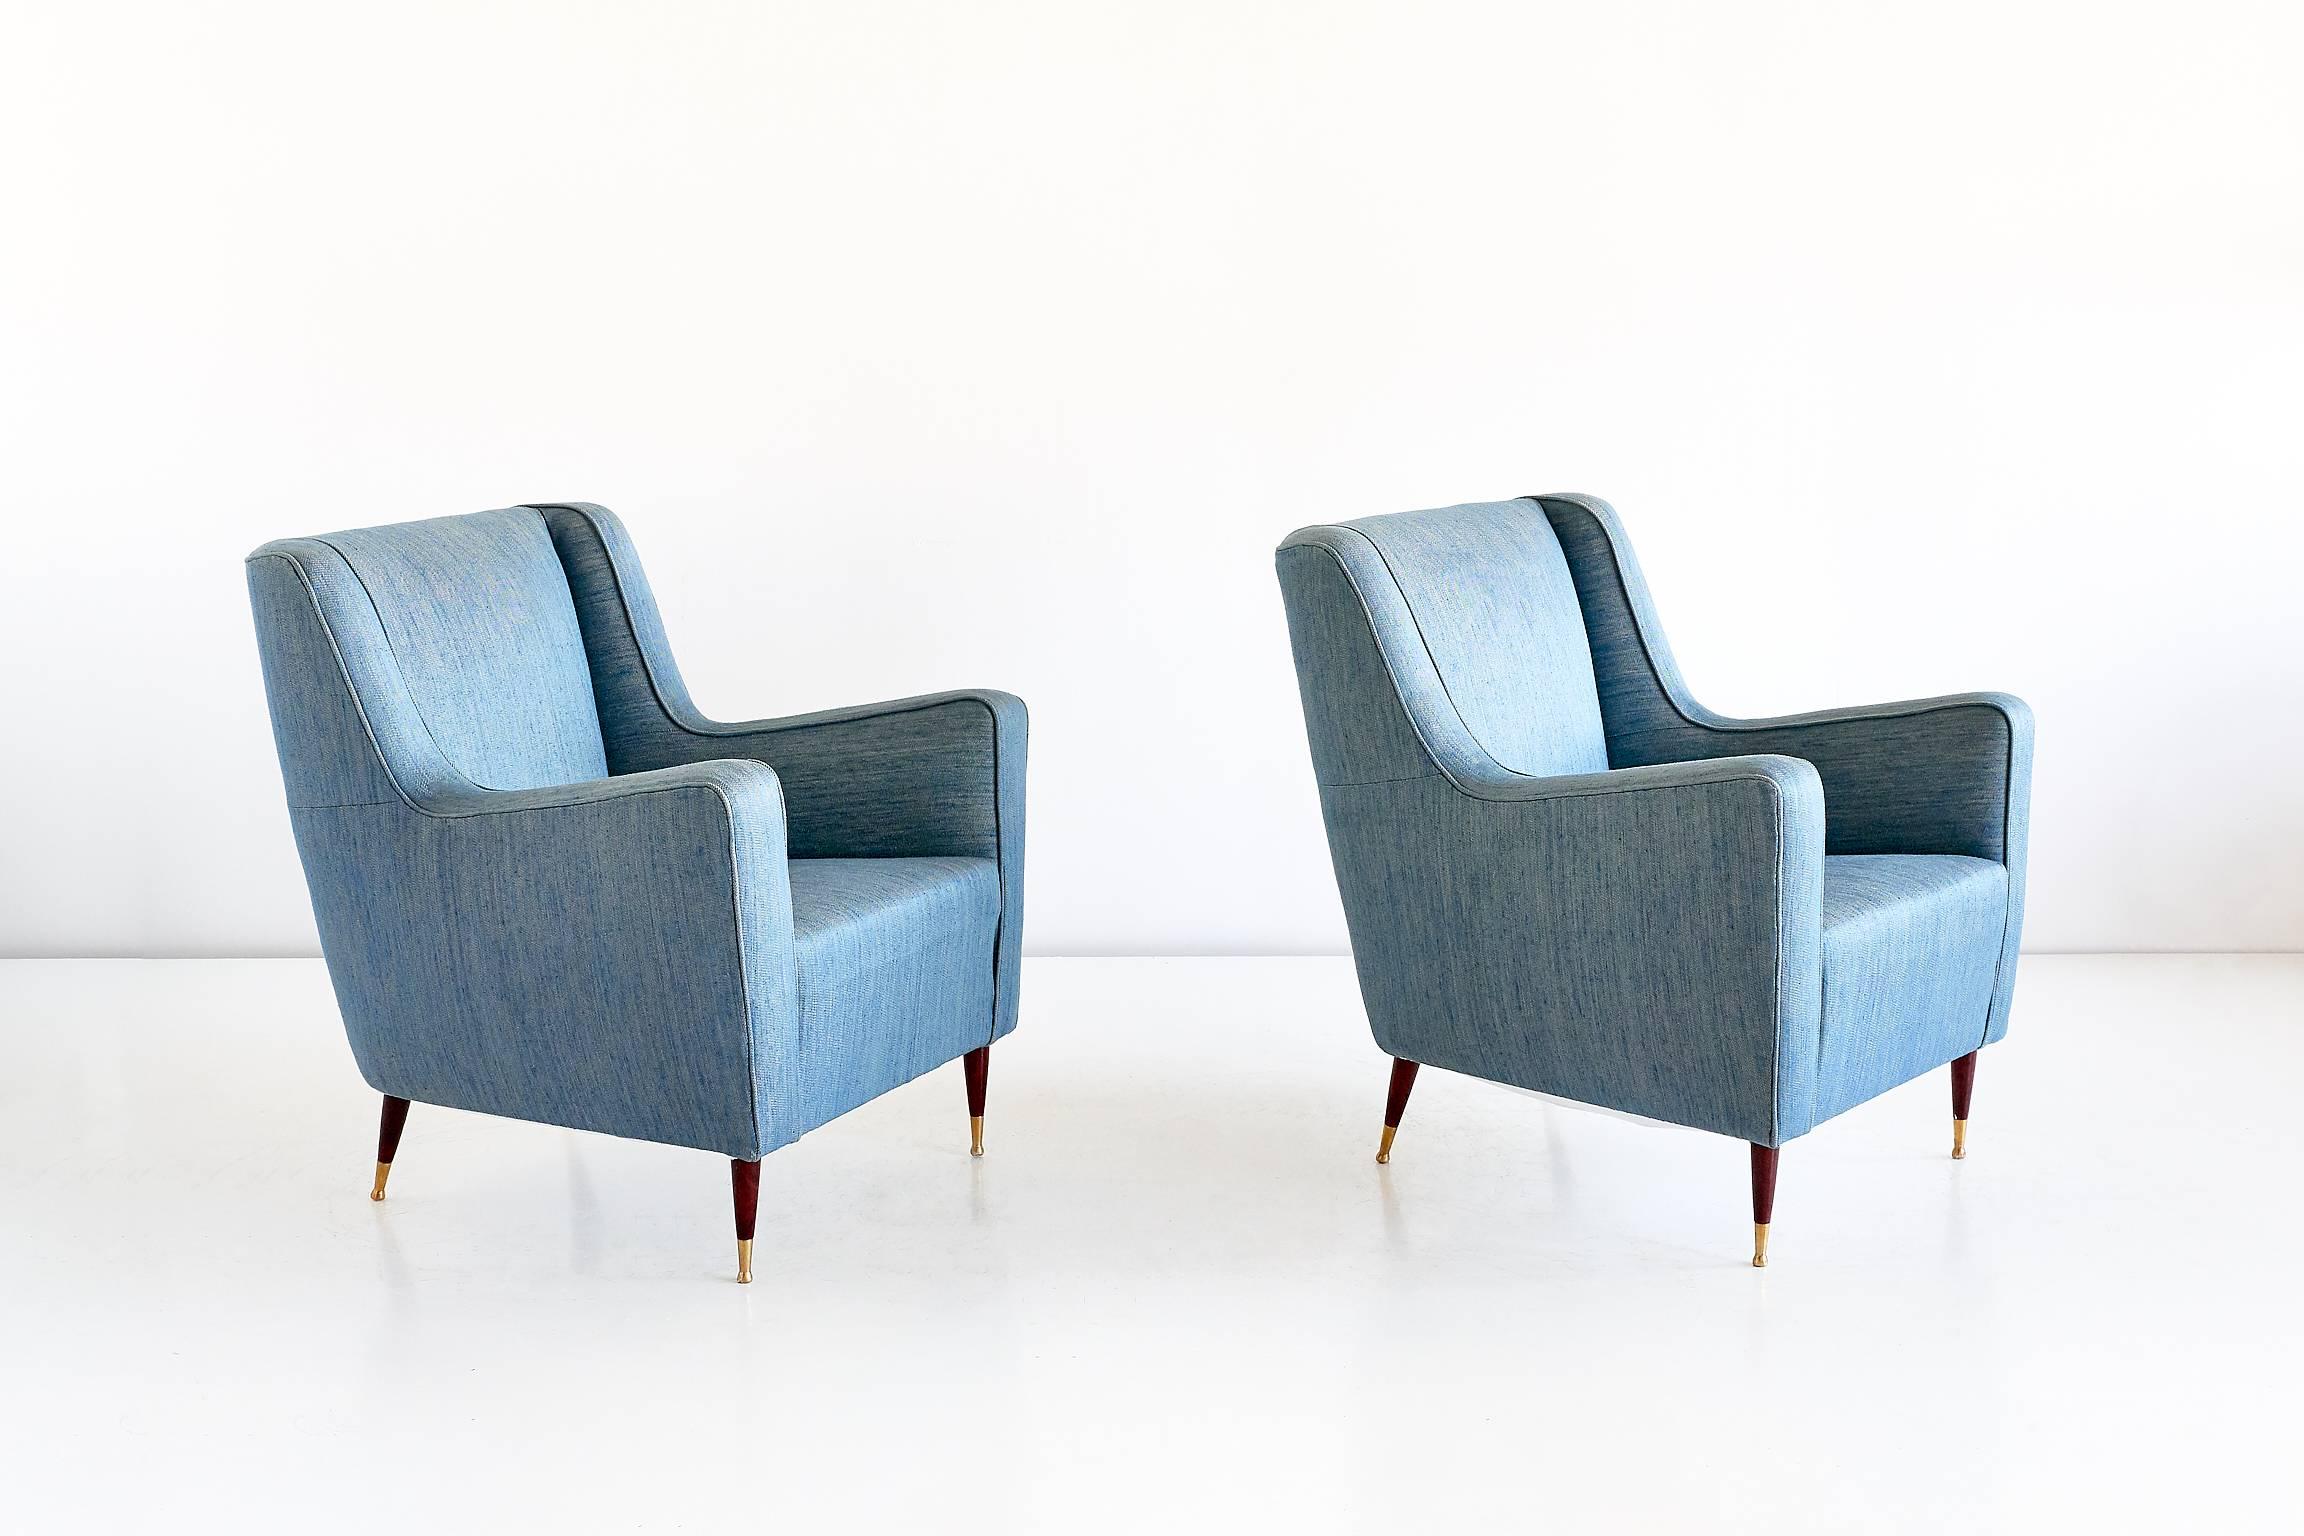 This rare pair of armchairs was designed by Gio Ponti in the late 1940s. The comfortable lounge chairs are characterized by their modern lines, elegantly tapered legs and brass feet. The model of this chair was designed for the Conte Grande